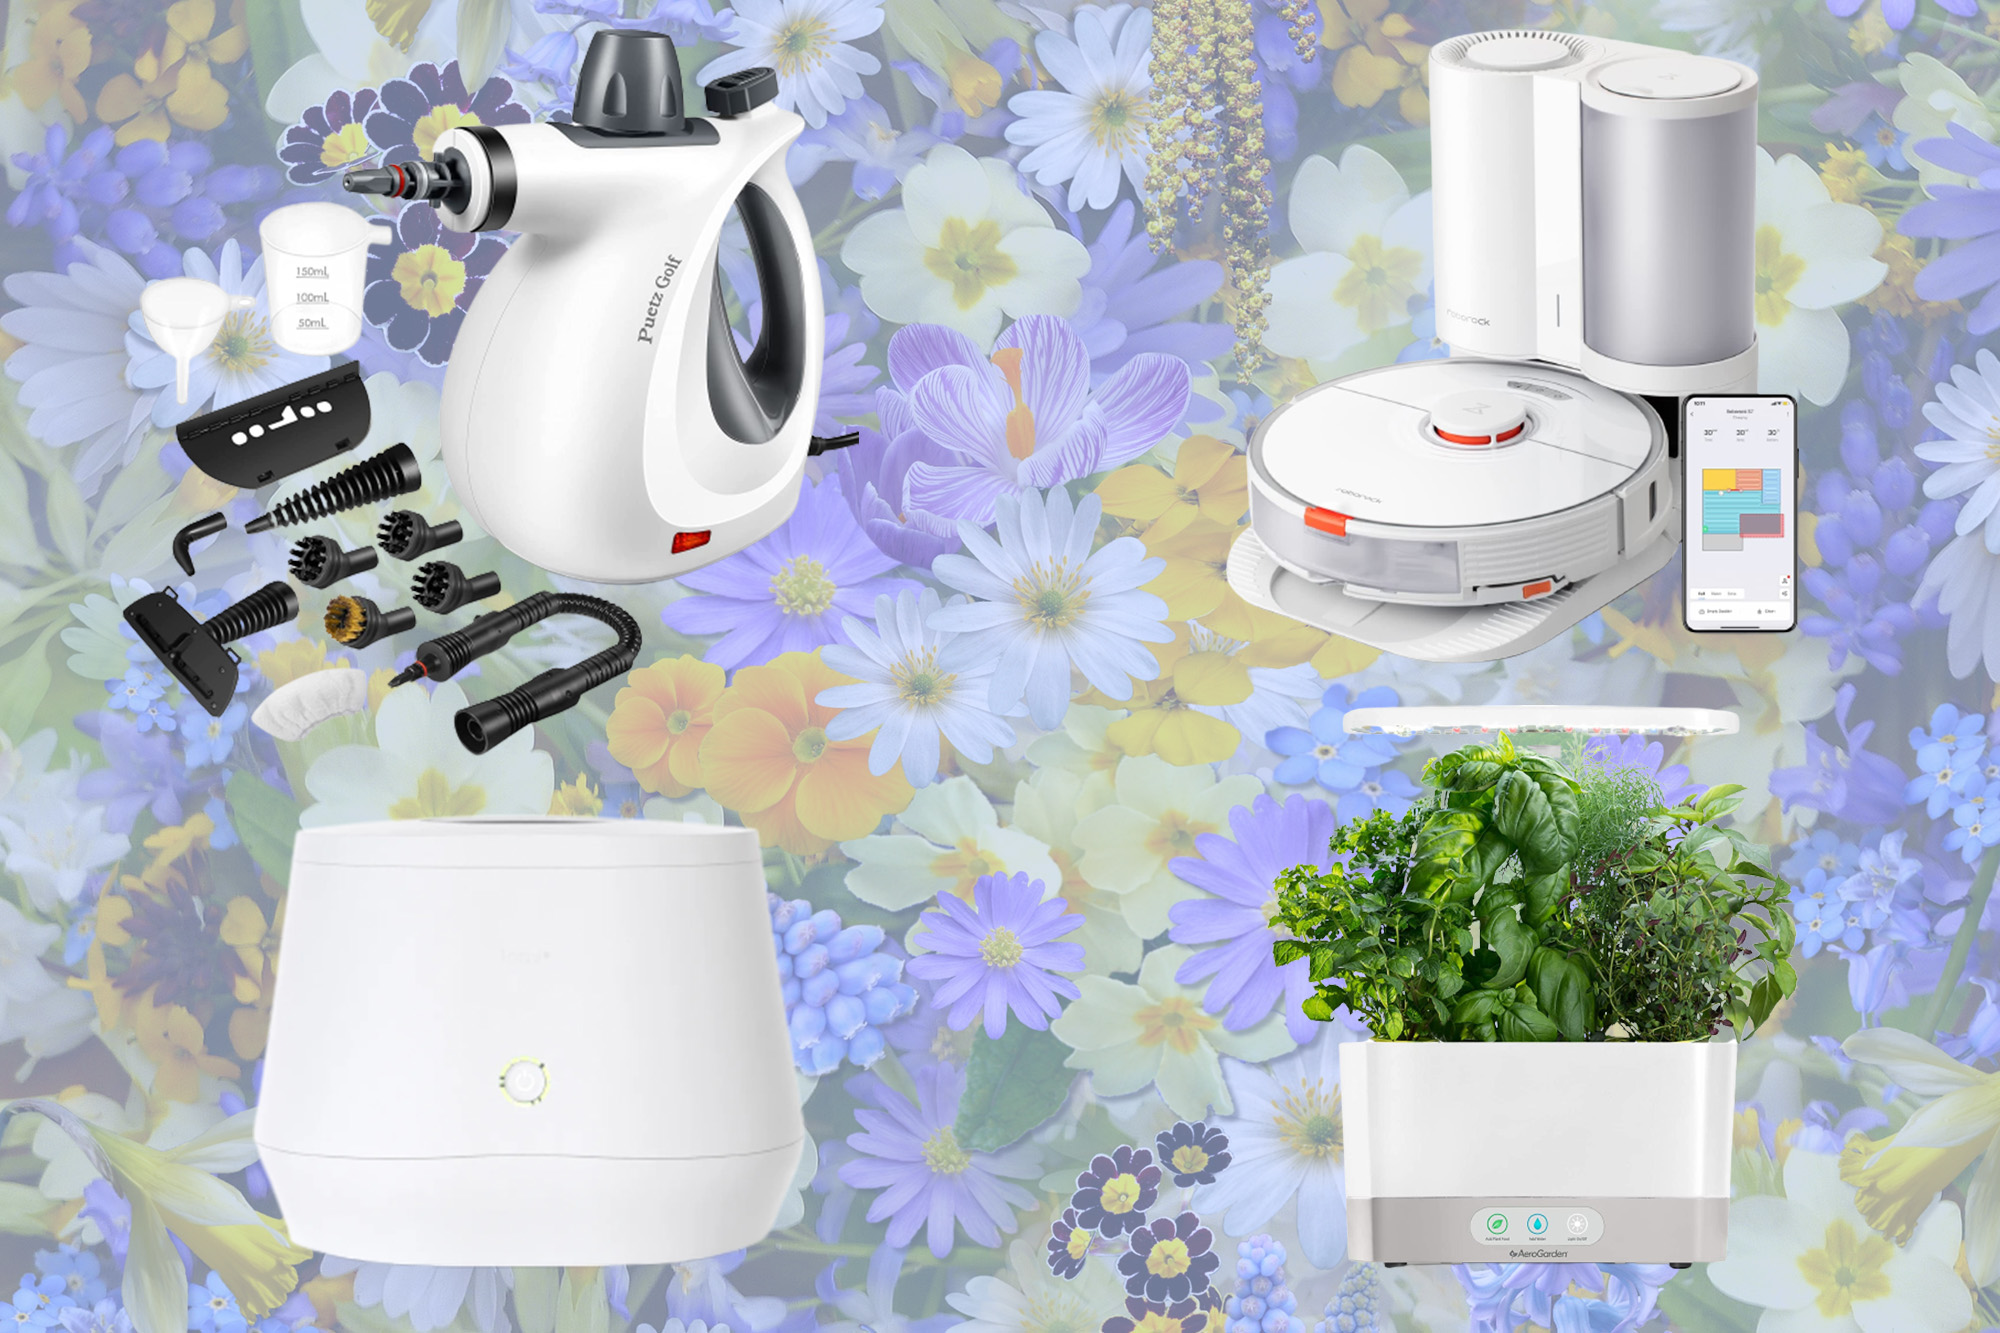 Start spring cleaning early with Amazon deals on vacuums, air purifiers, and more